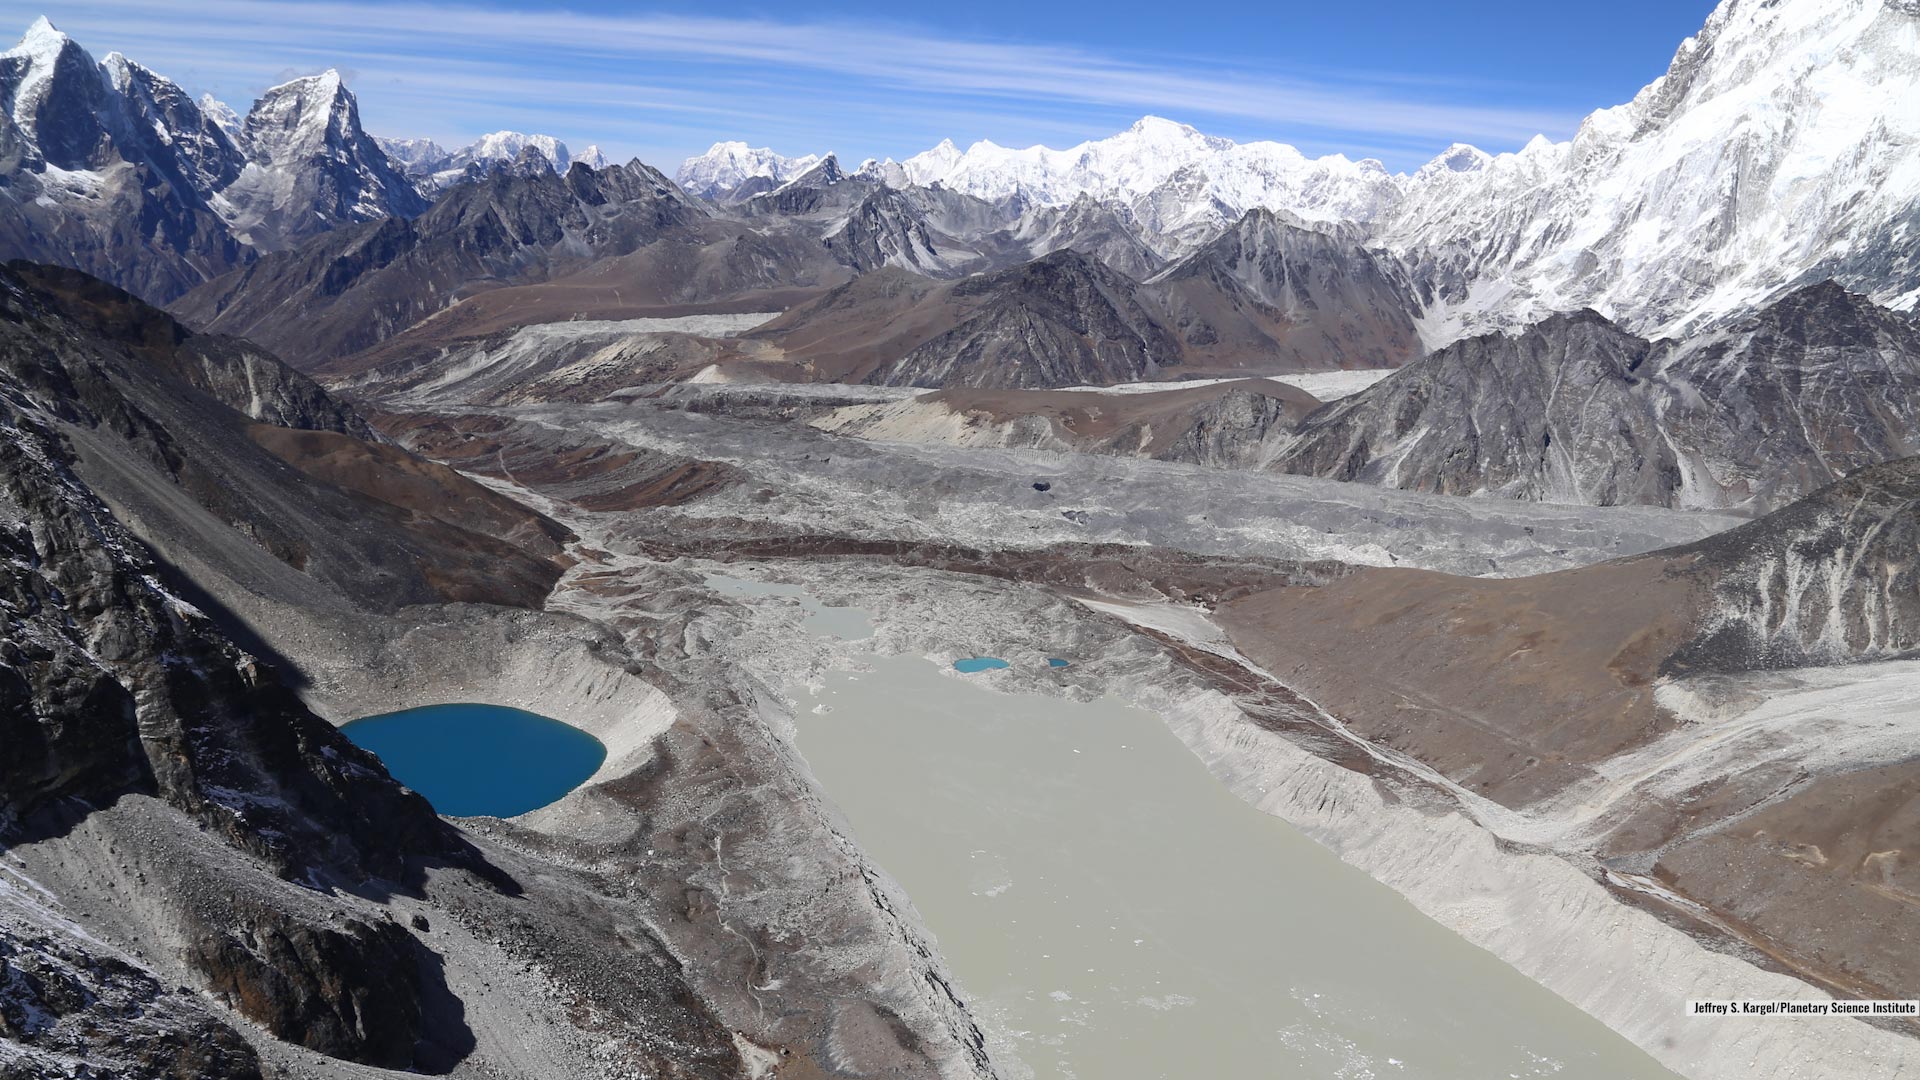 Aerial view of Imja Glacial Lake in Nepal, highlighting the threat it poses to downstream communities.